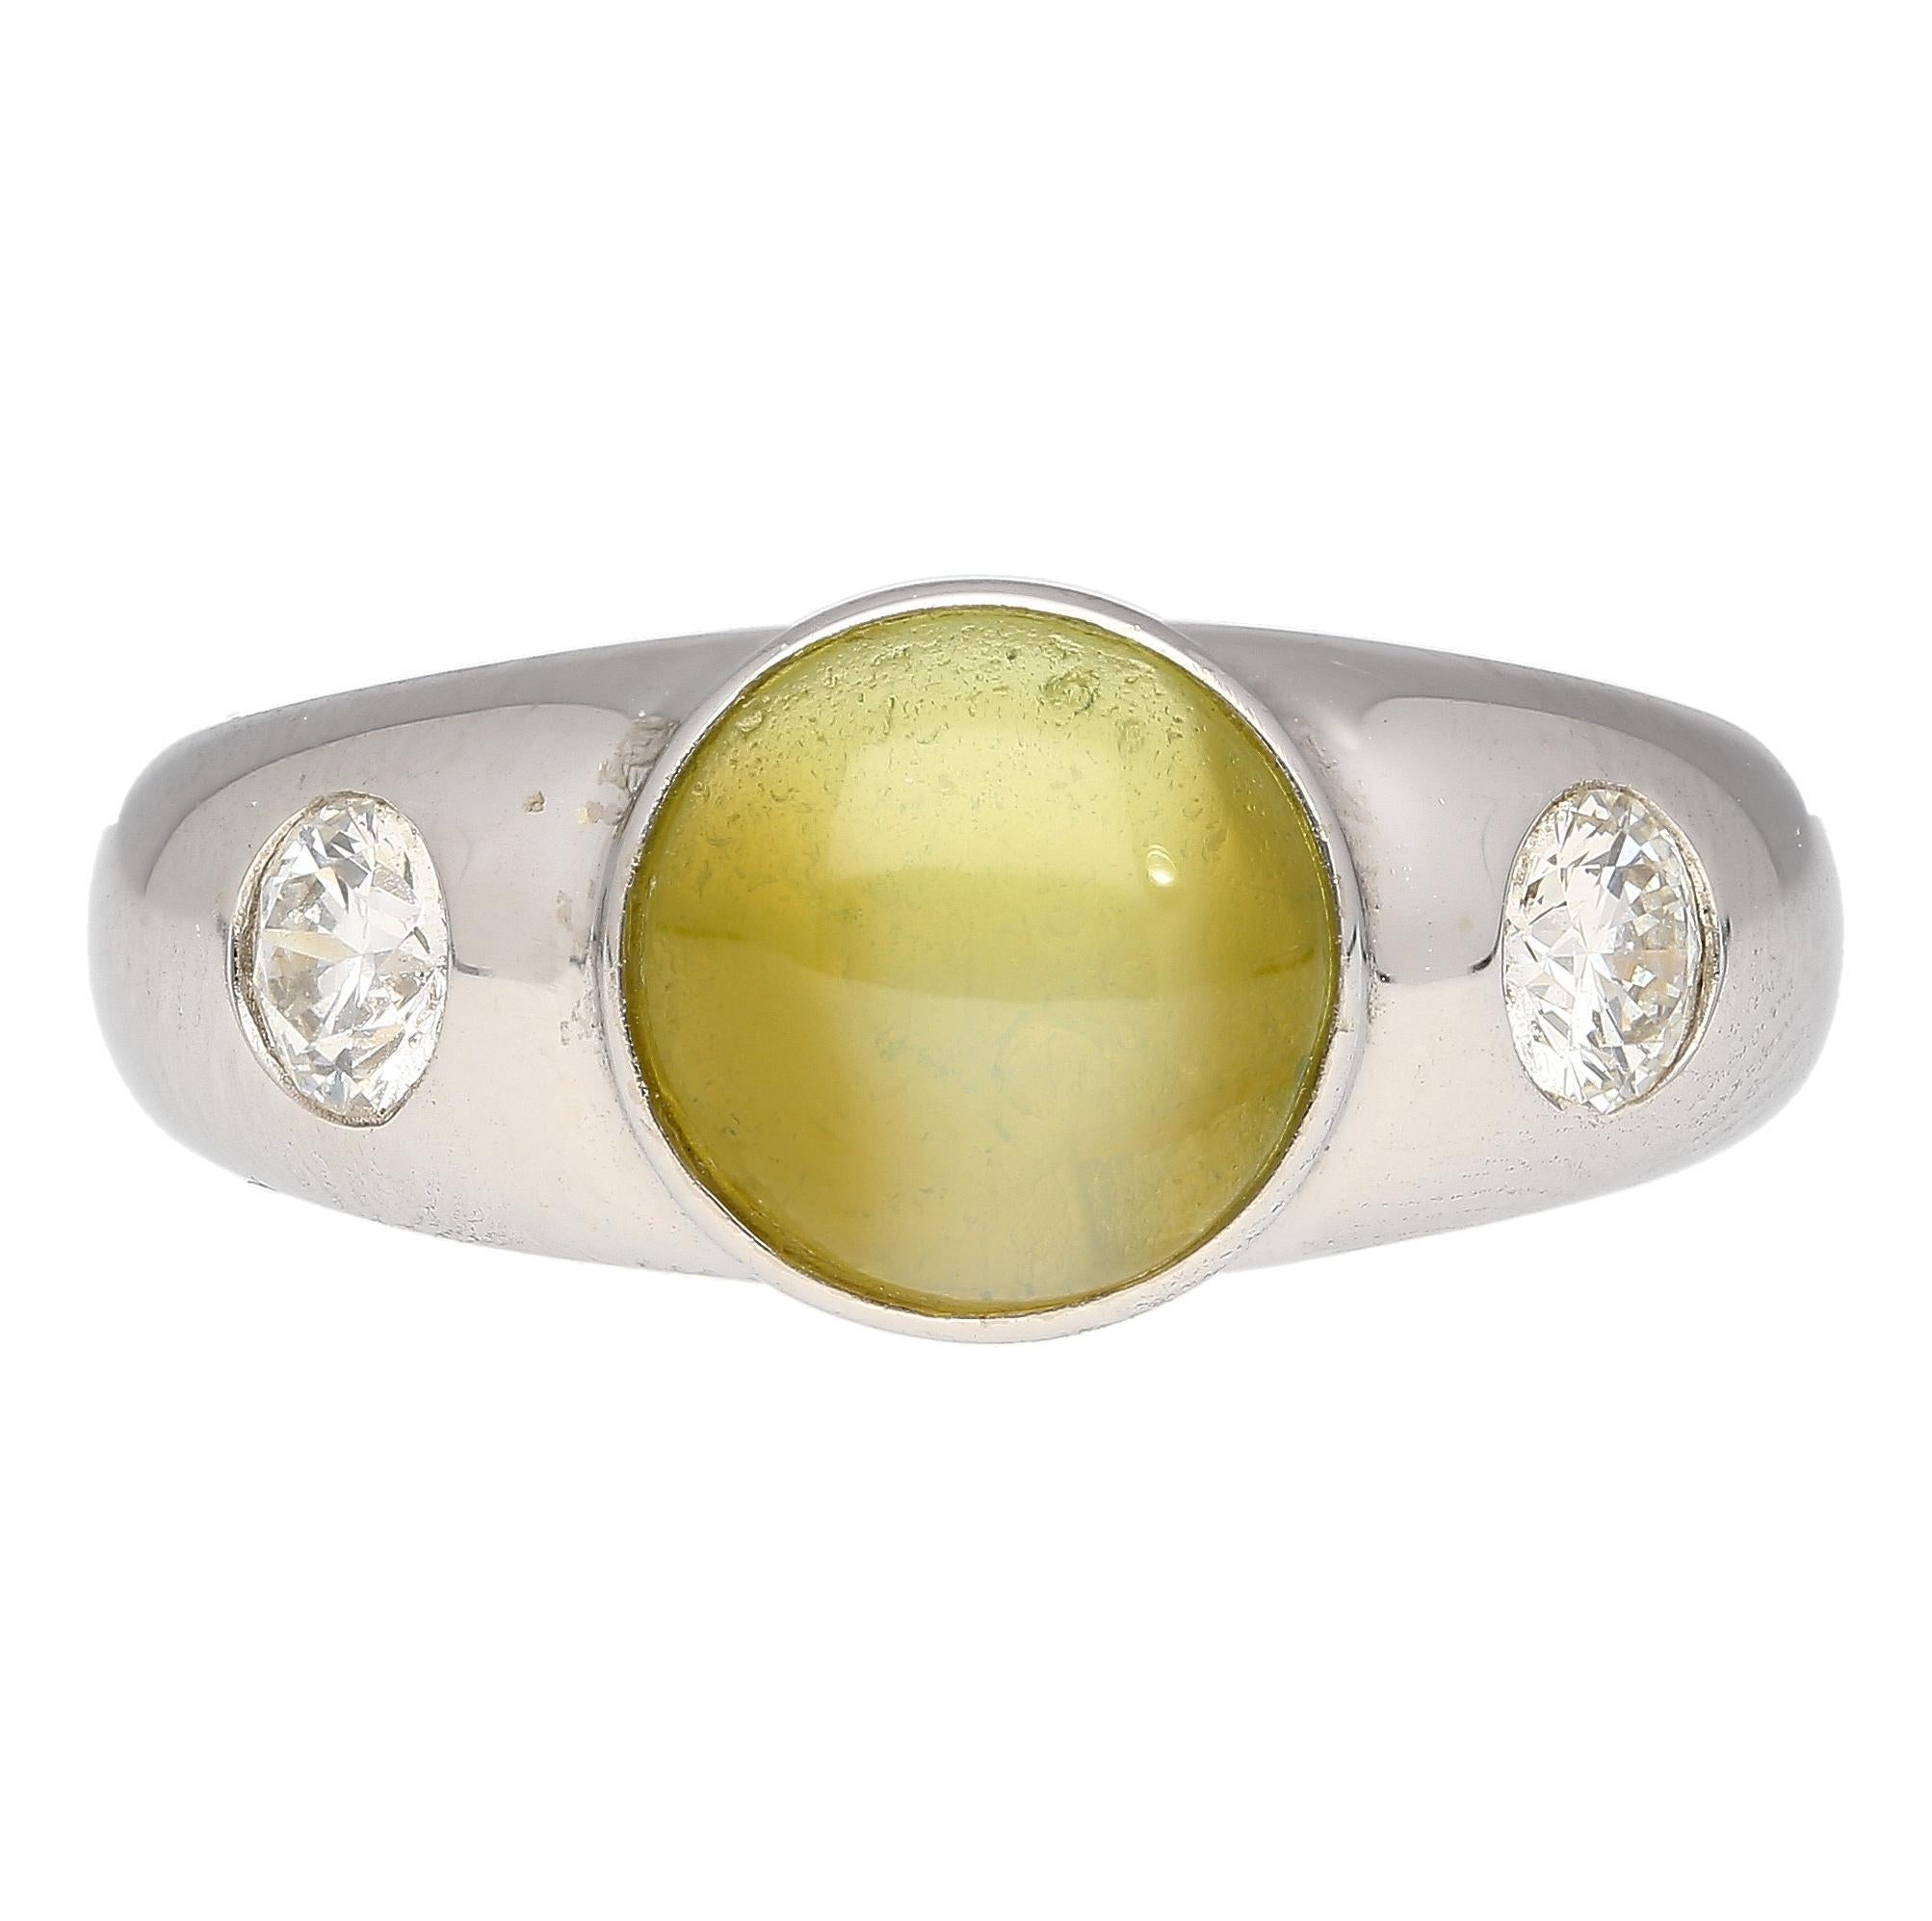 Bezel Set Chrysoberyl Cat's Eye and Diamond Three Stone Ring in 18K White Gold. Featuring a smooth polished finish and nicely centered cats eye. The center stone has excellent luster, uniformity and color.  

Details: 
Item Type: Ring 
 Metal: 18k